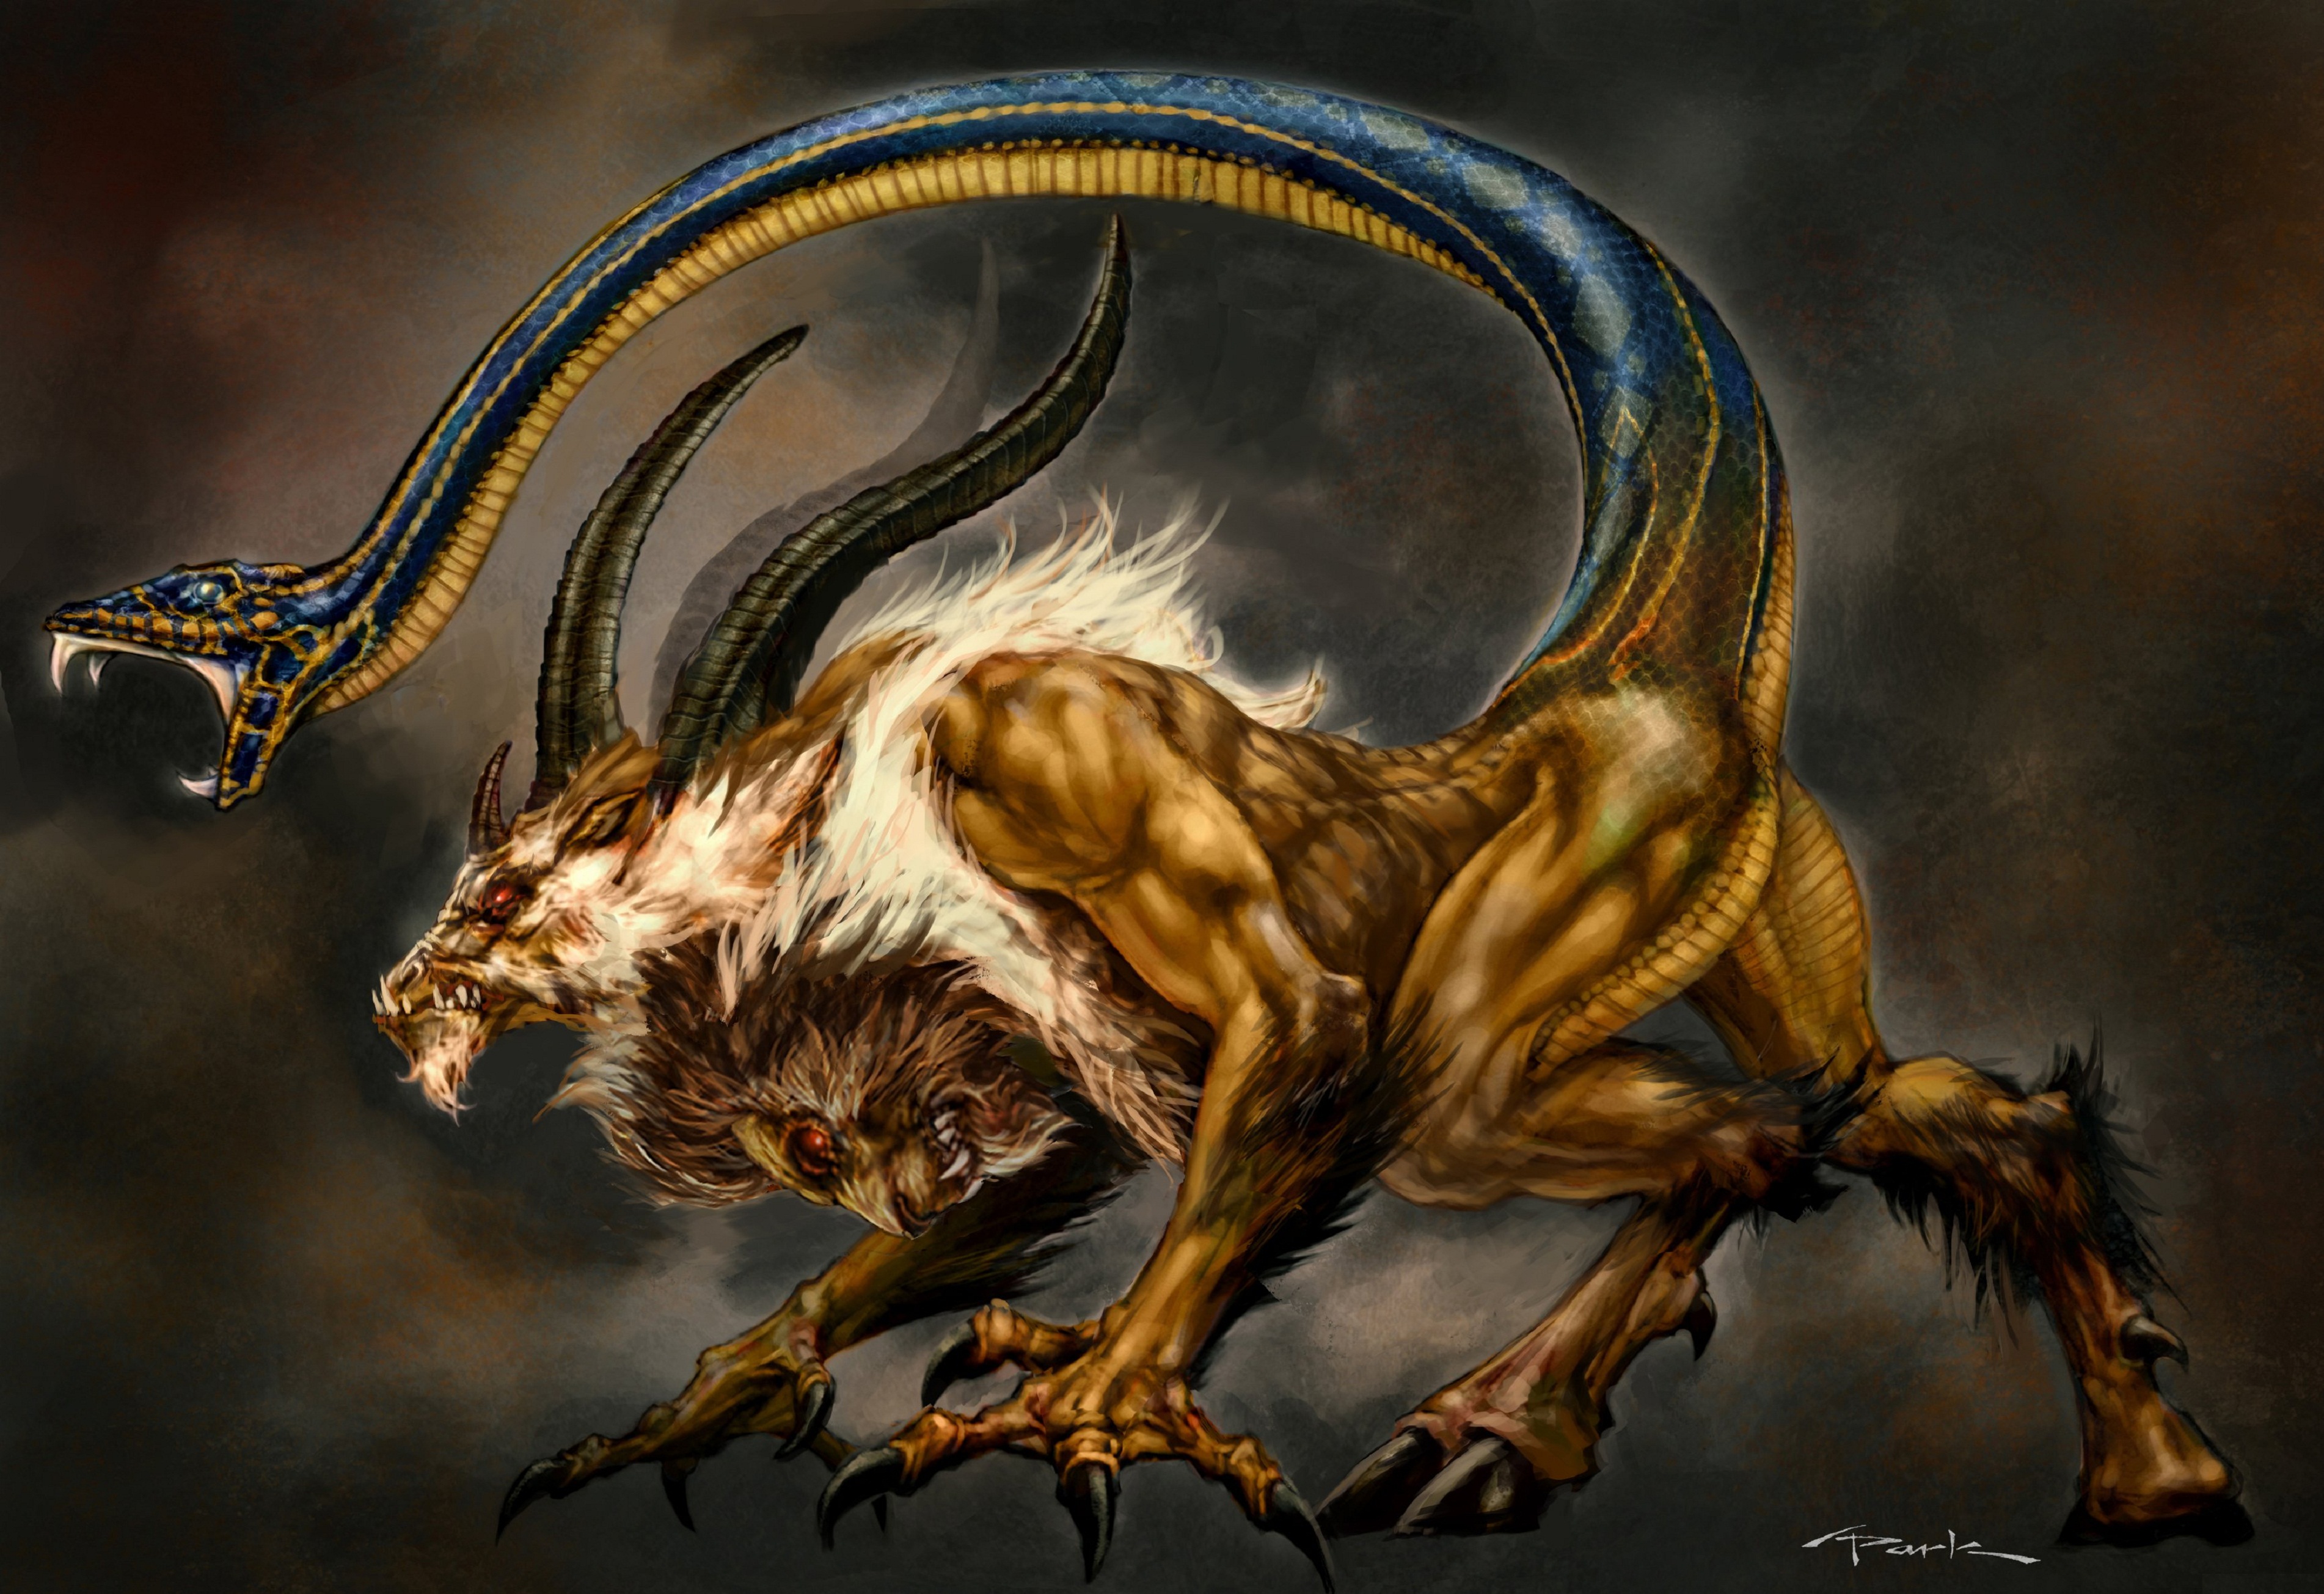 Eight creepiest mythical creatures from around the world Gengo